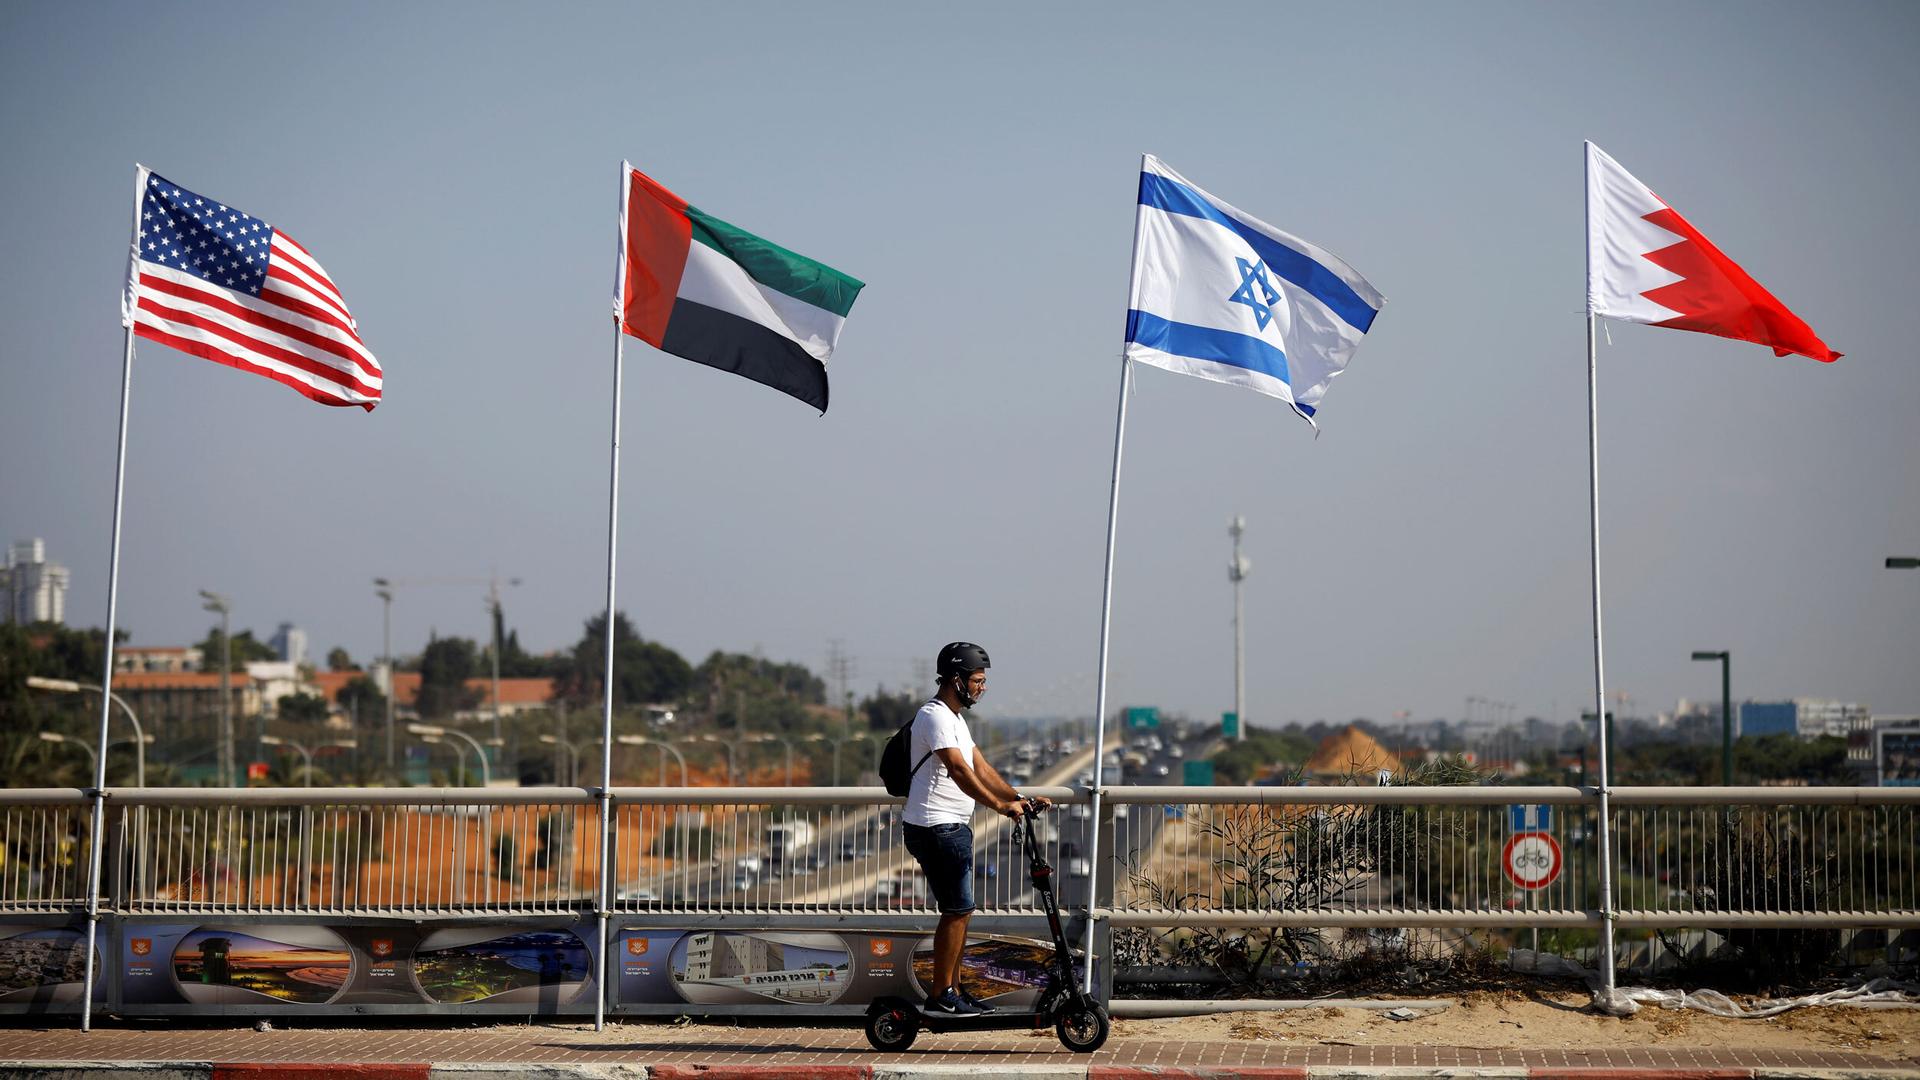 A man rides a scooter past the flags of the US, United Arab Emirates, Israel and Bahrain along a road in Netanya, Israel, Sept. 14, 2020.